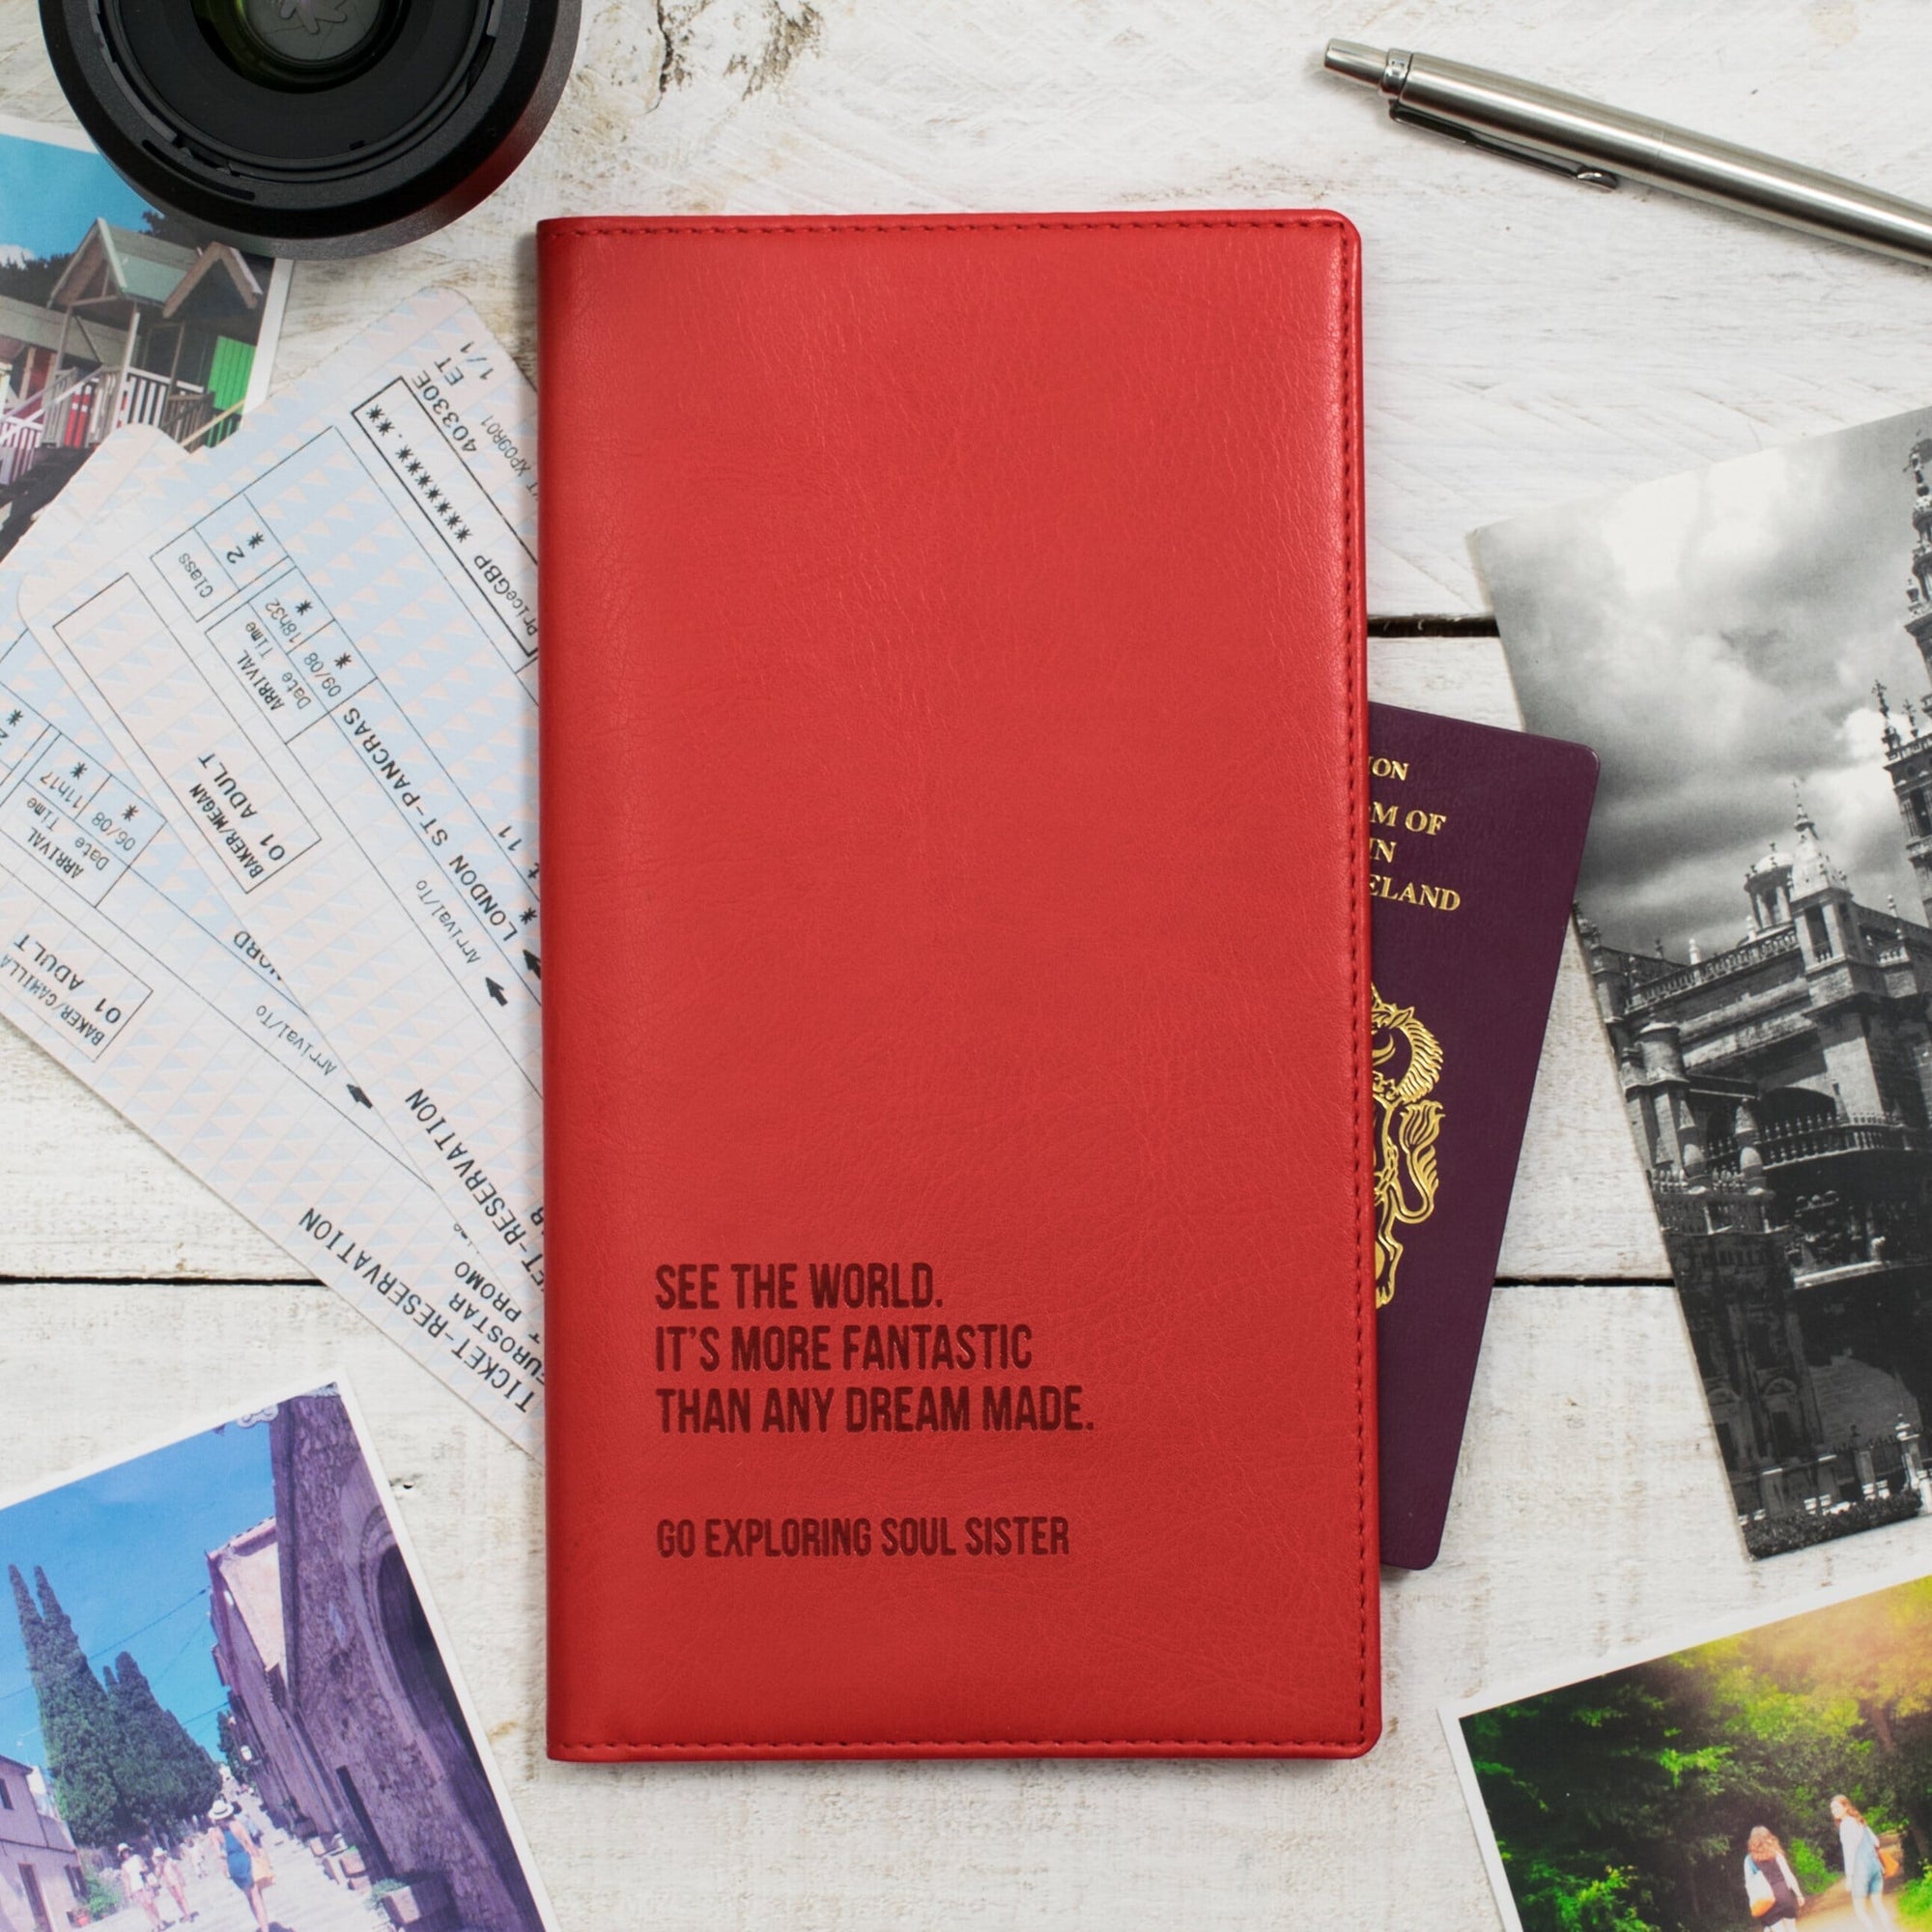 Vegan leather document wallet with personalised laser engraving on the cover